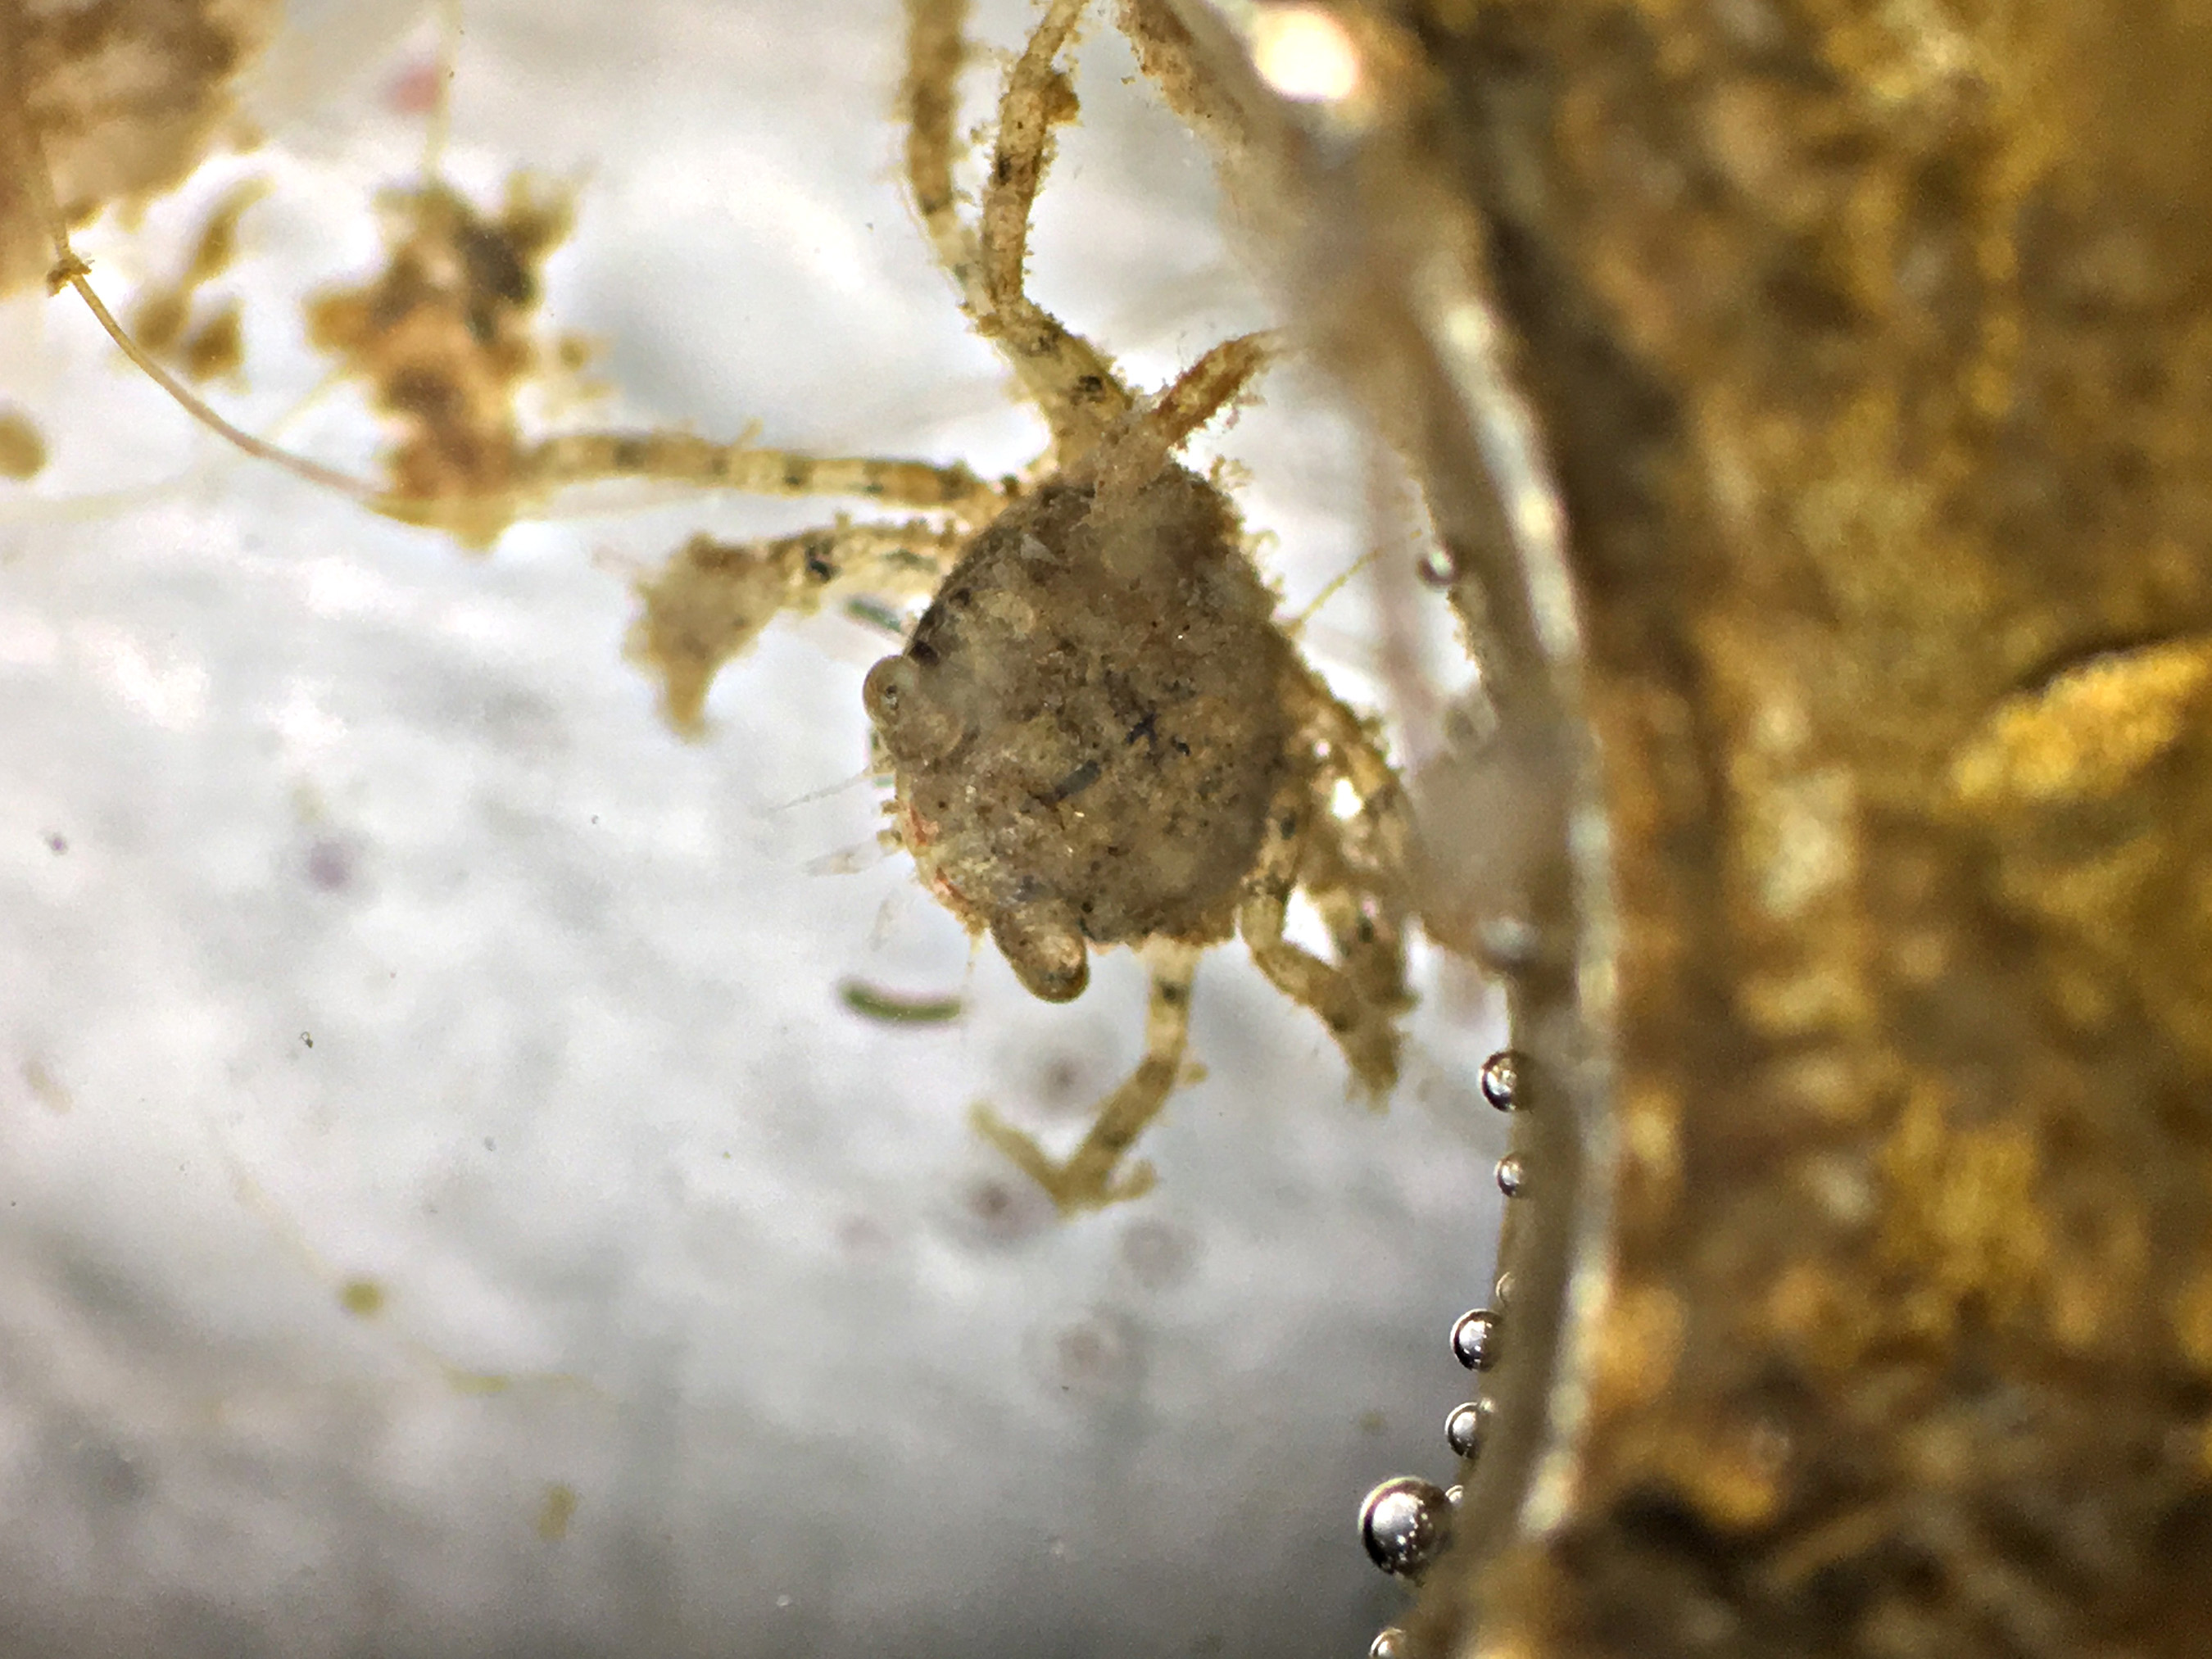 image of black-fingered mud crab inside center hole of bio-disc, seen through a microscope. There are 6 legs, two claws on the front and two paddles on the rear of the crab.